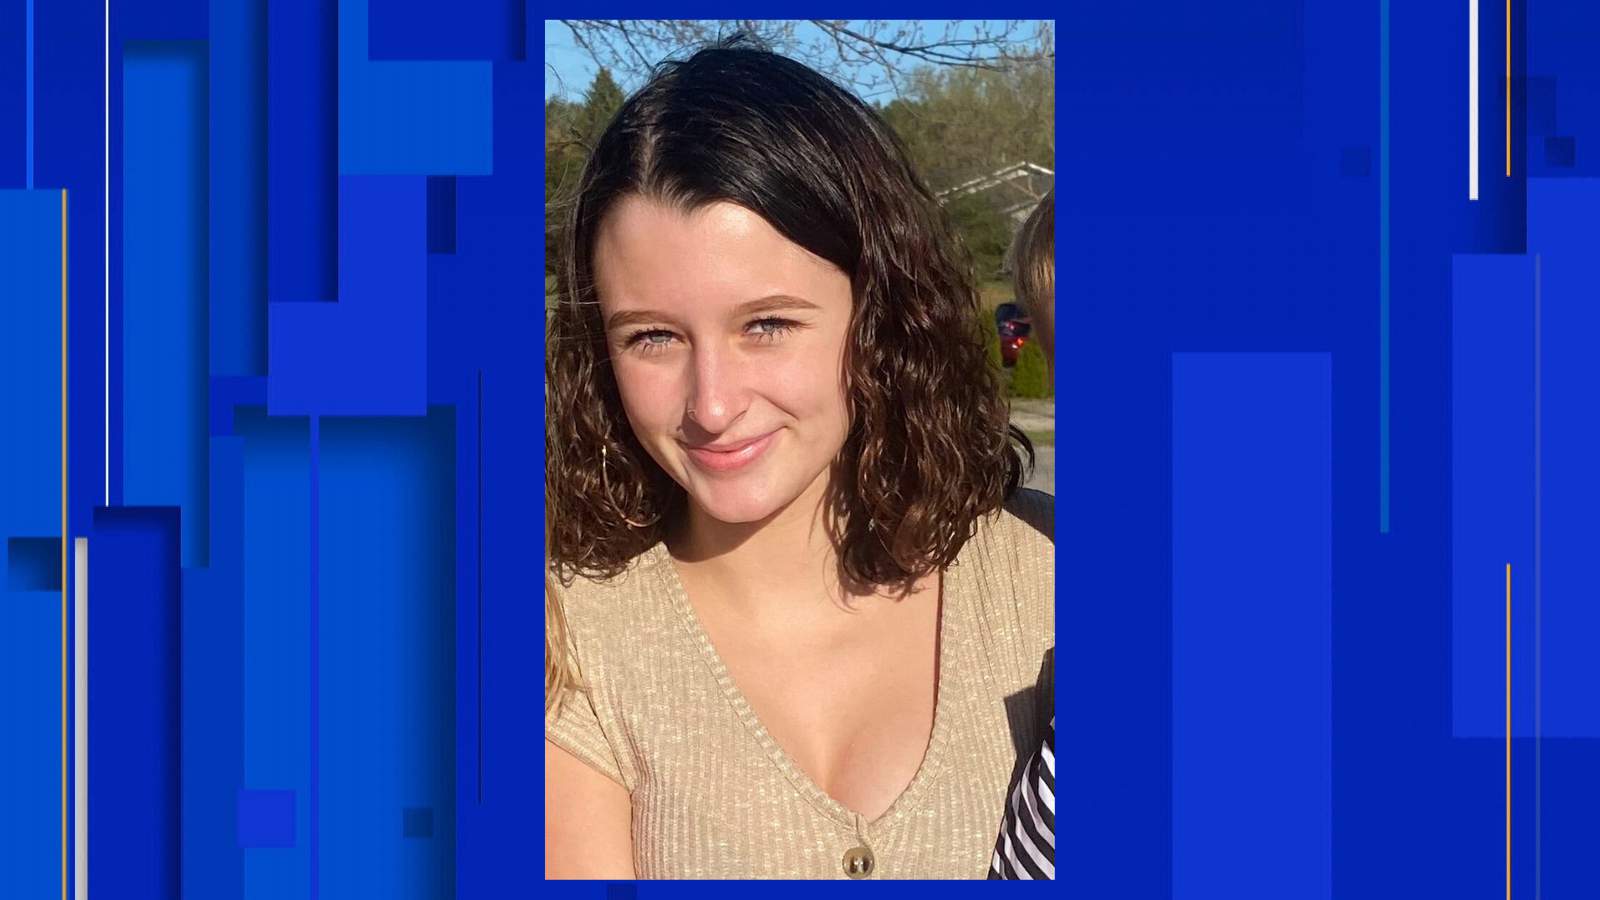 Amber Alert issued for missing 15-year-old girl in Grand Traverse County